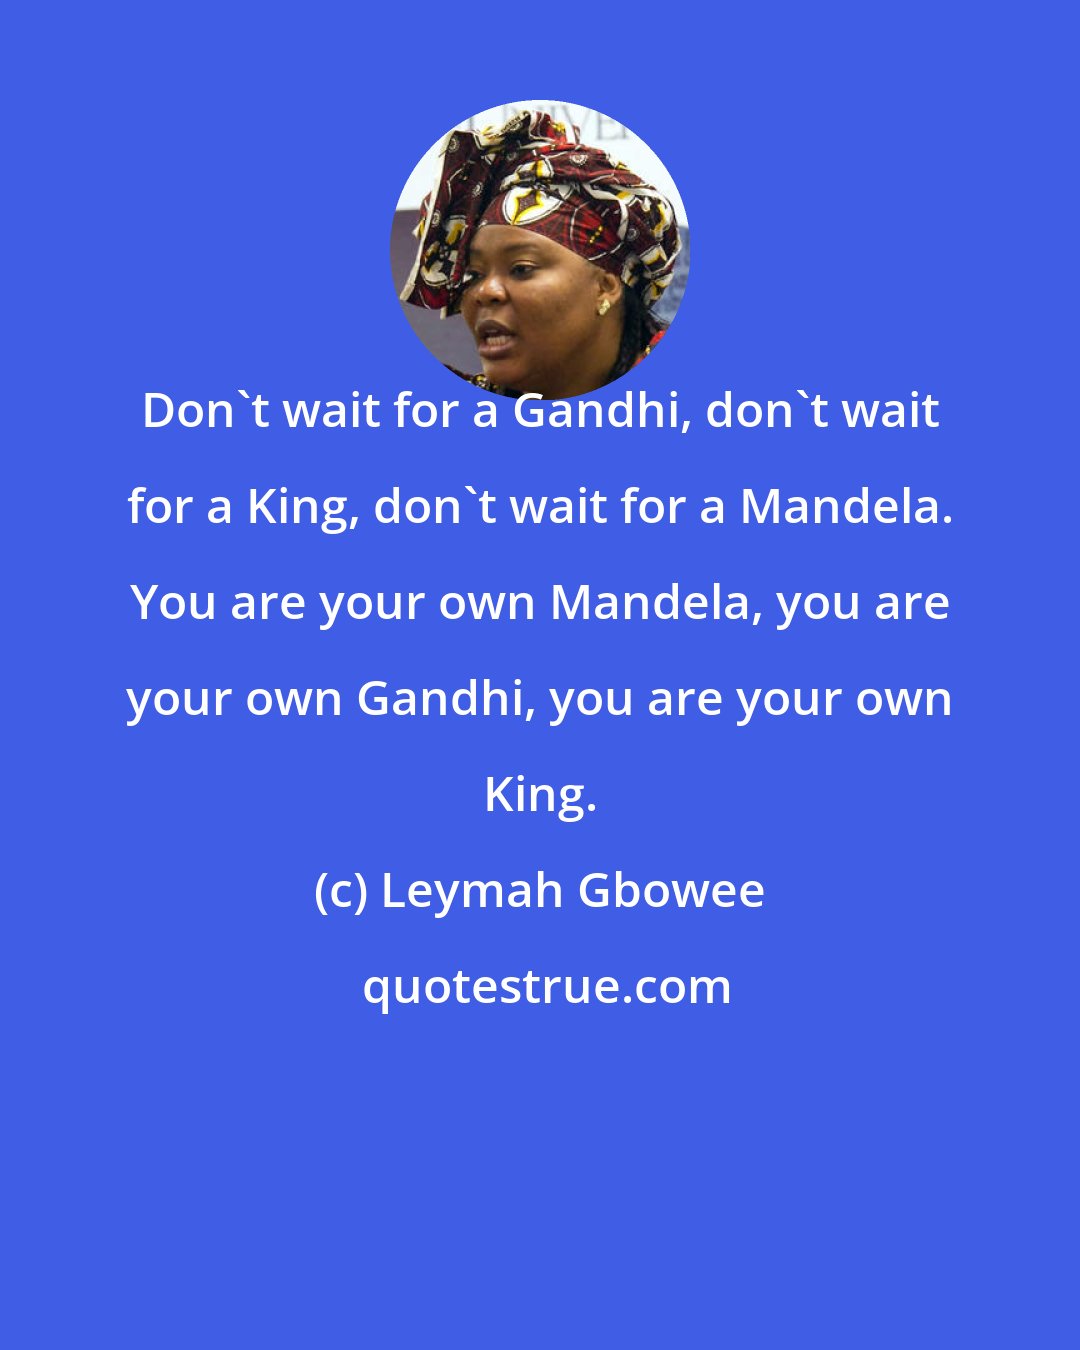 Leymah Gbowee: Don't wait for a Gandhi, don't wait for a King, don't wait for a Mandela. You are your own Mandela, you are your own Gandhi, you are your own King.